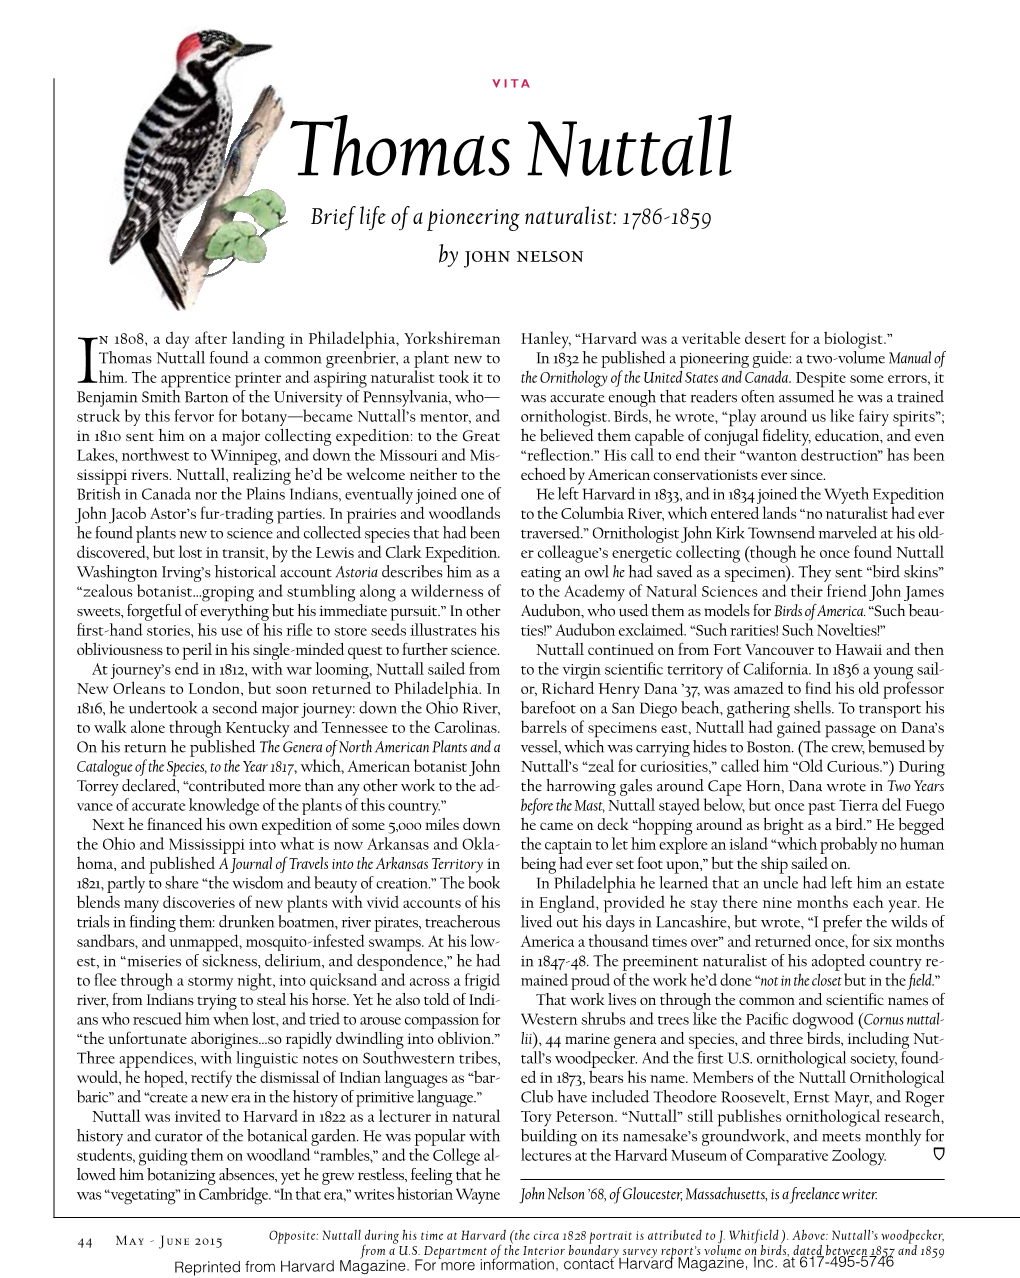 Thomas Nuttall Brief Life of a Pioneering Naturalist: 1786-1859 by John Nelson